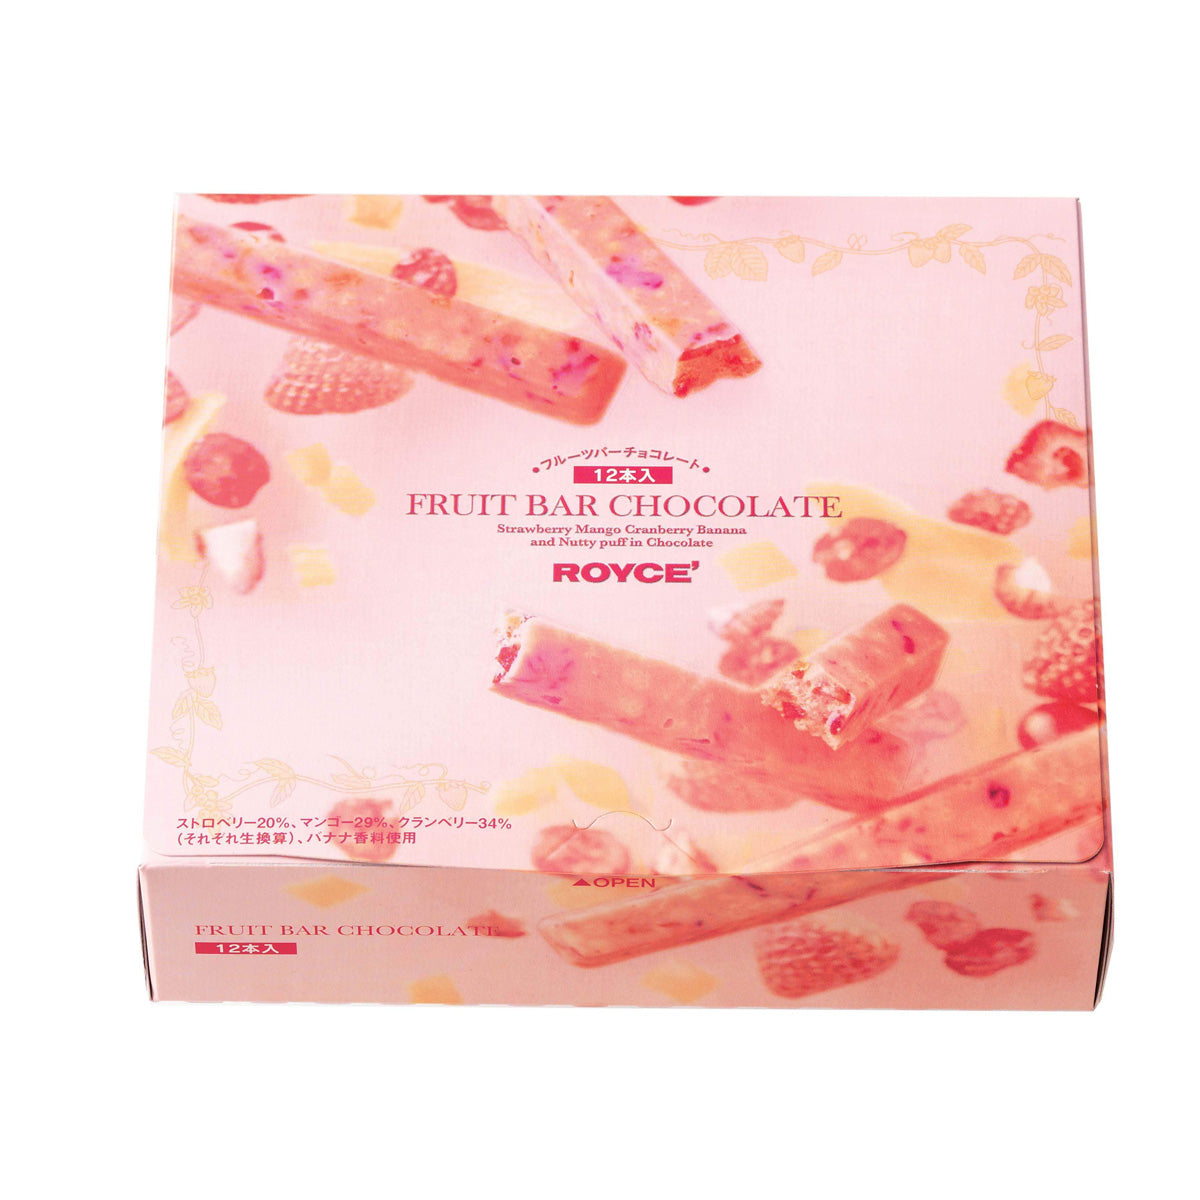 ROYCE' Chocolate - Fruit Bar Chocolate - Image shows a pink box with pictures of fruits and pink chocolate bars. Text in the middle says Fruit Bar Chocolate Strawberry Mango Cranberry Banana and Nutty Puff in Chocolate ROYCE'.